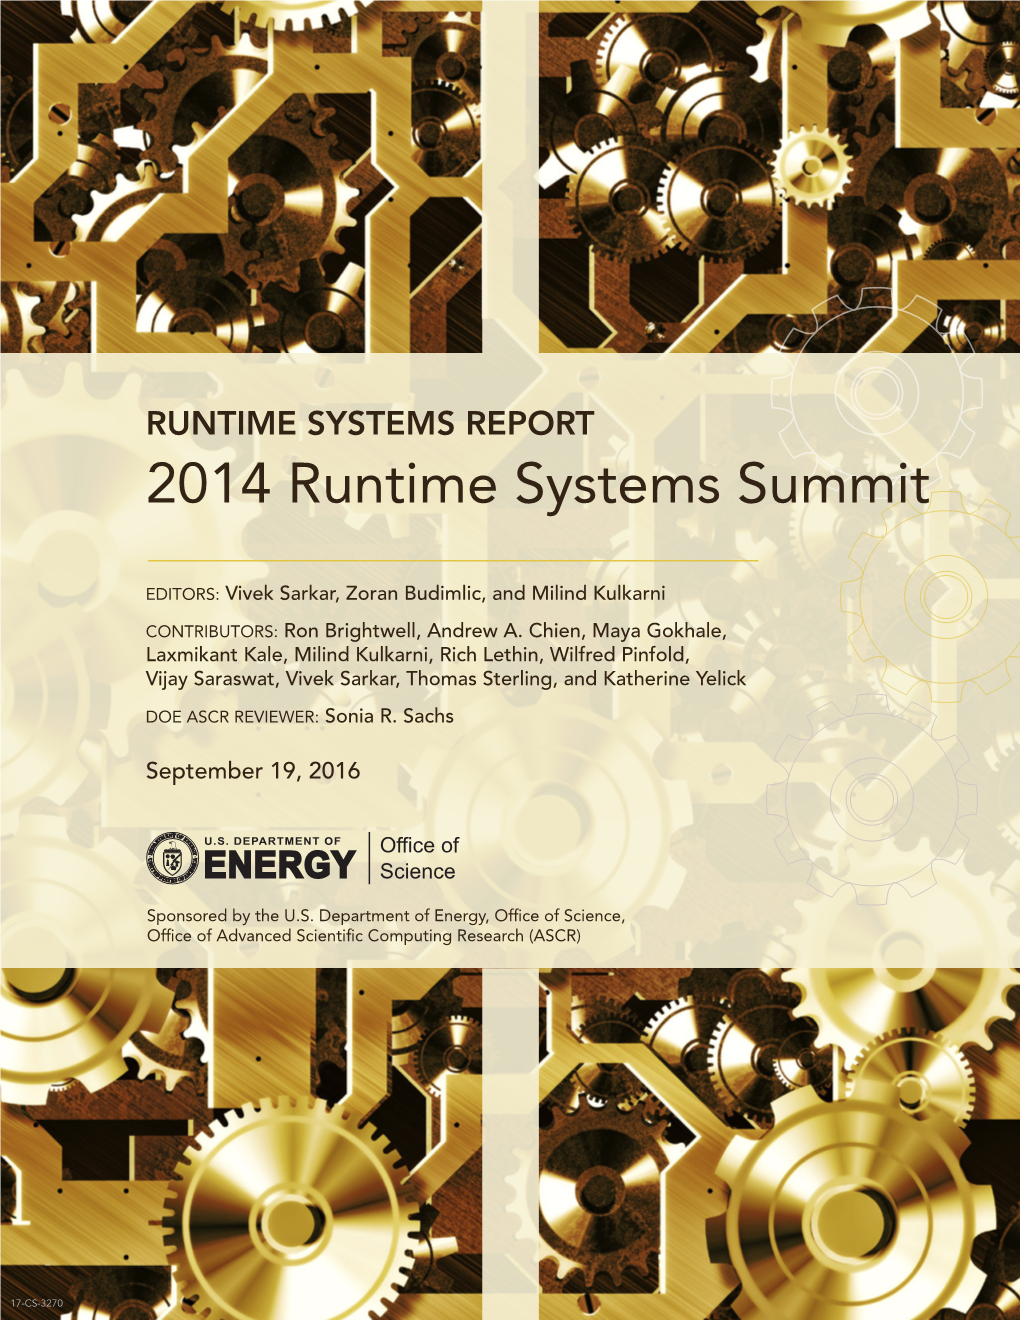 2014 Runtime Systems Summit. Runtime Systems Report